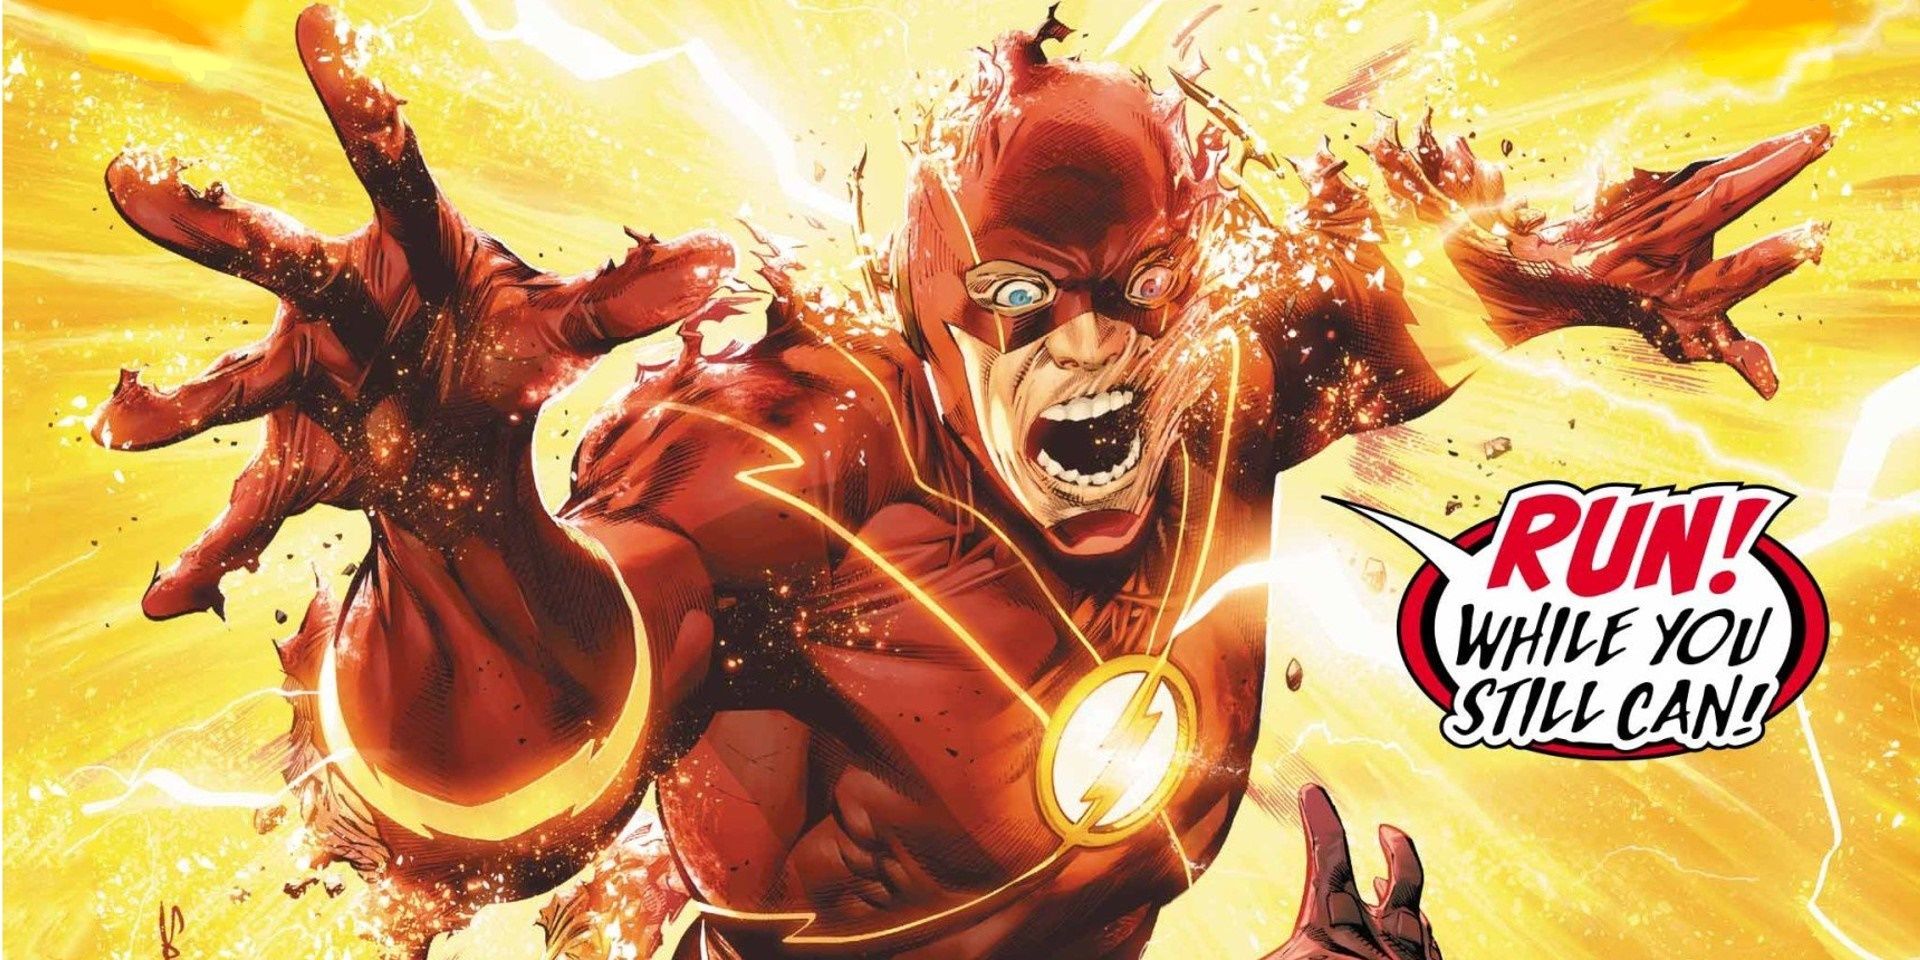 Flash Disappears into the Speed Force on the cover of Issue 79.